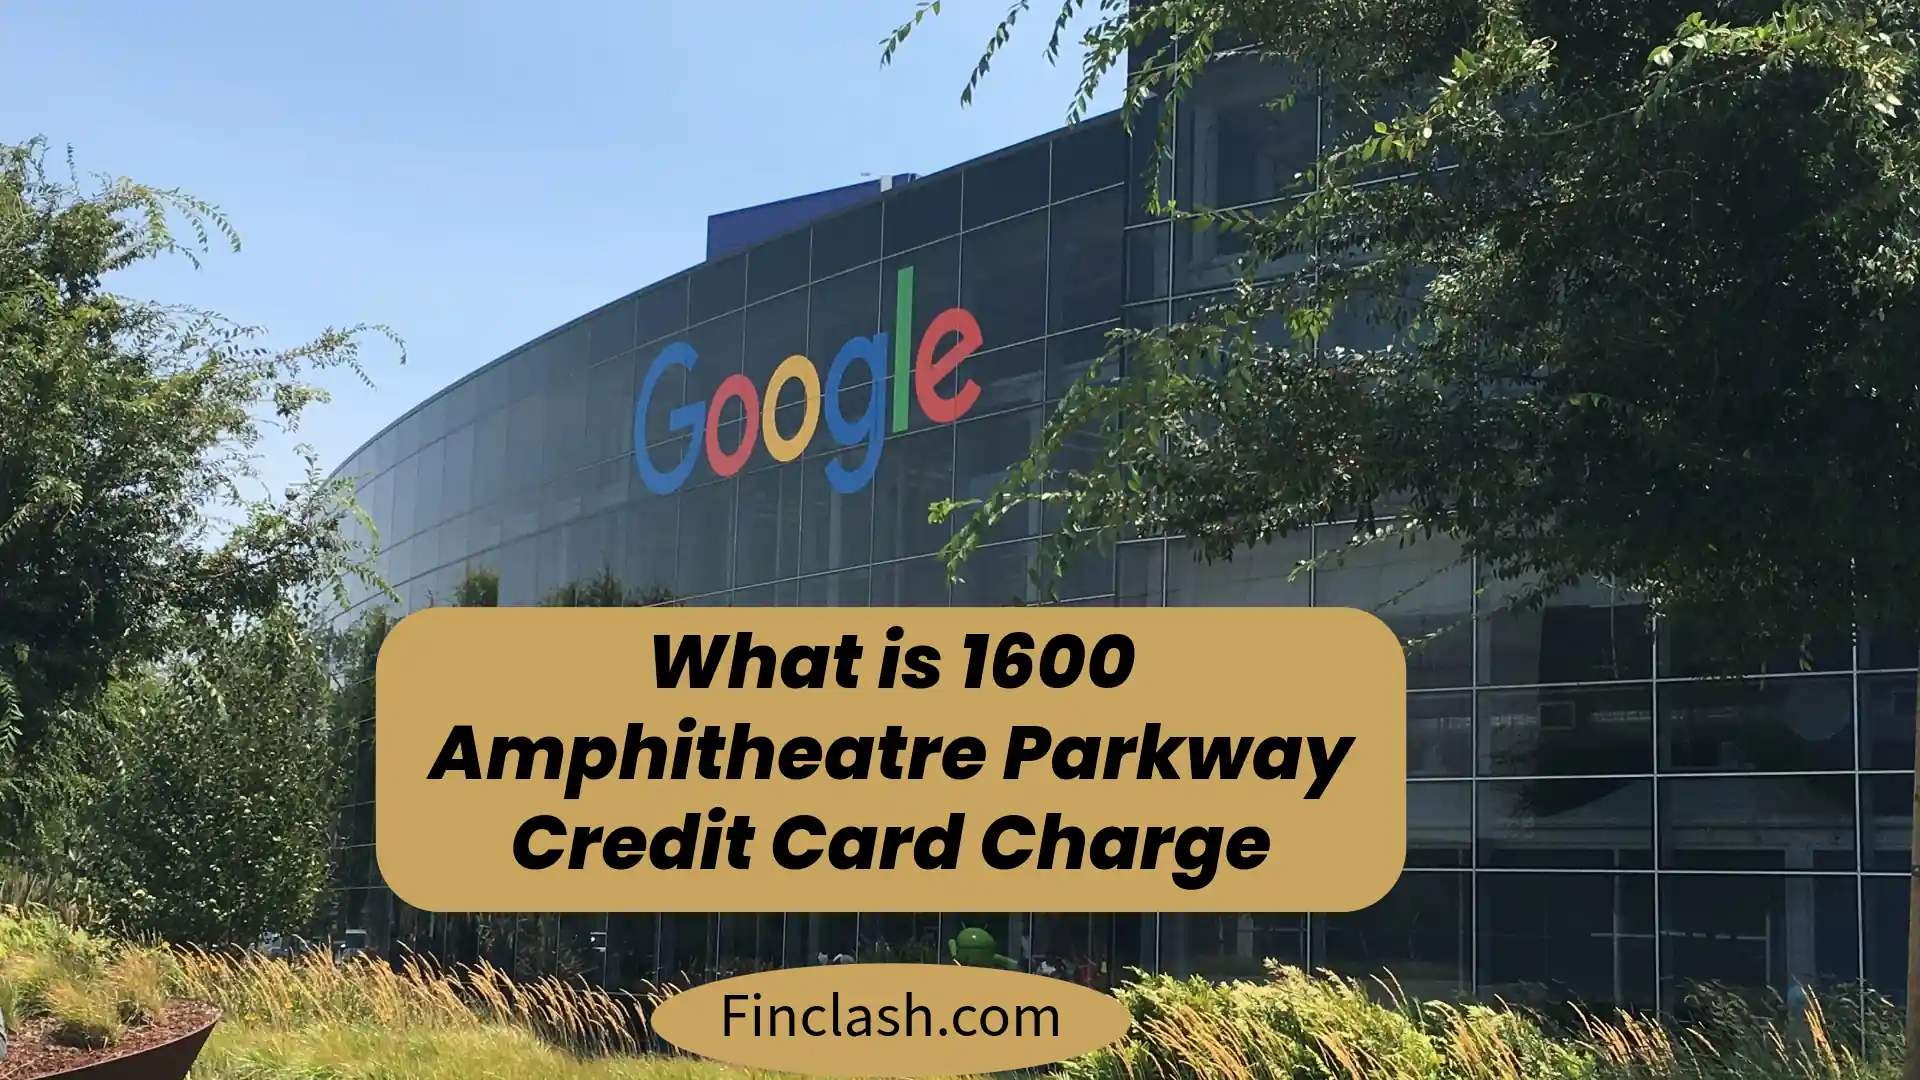 What is 1600 Amphitheatre Parkway Credit Card Charge